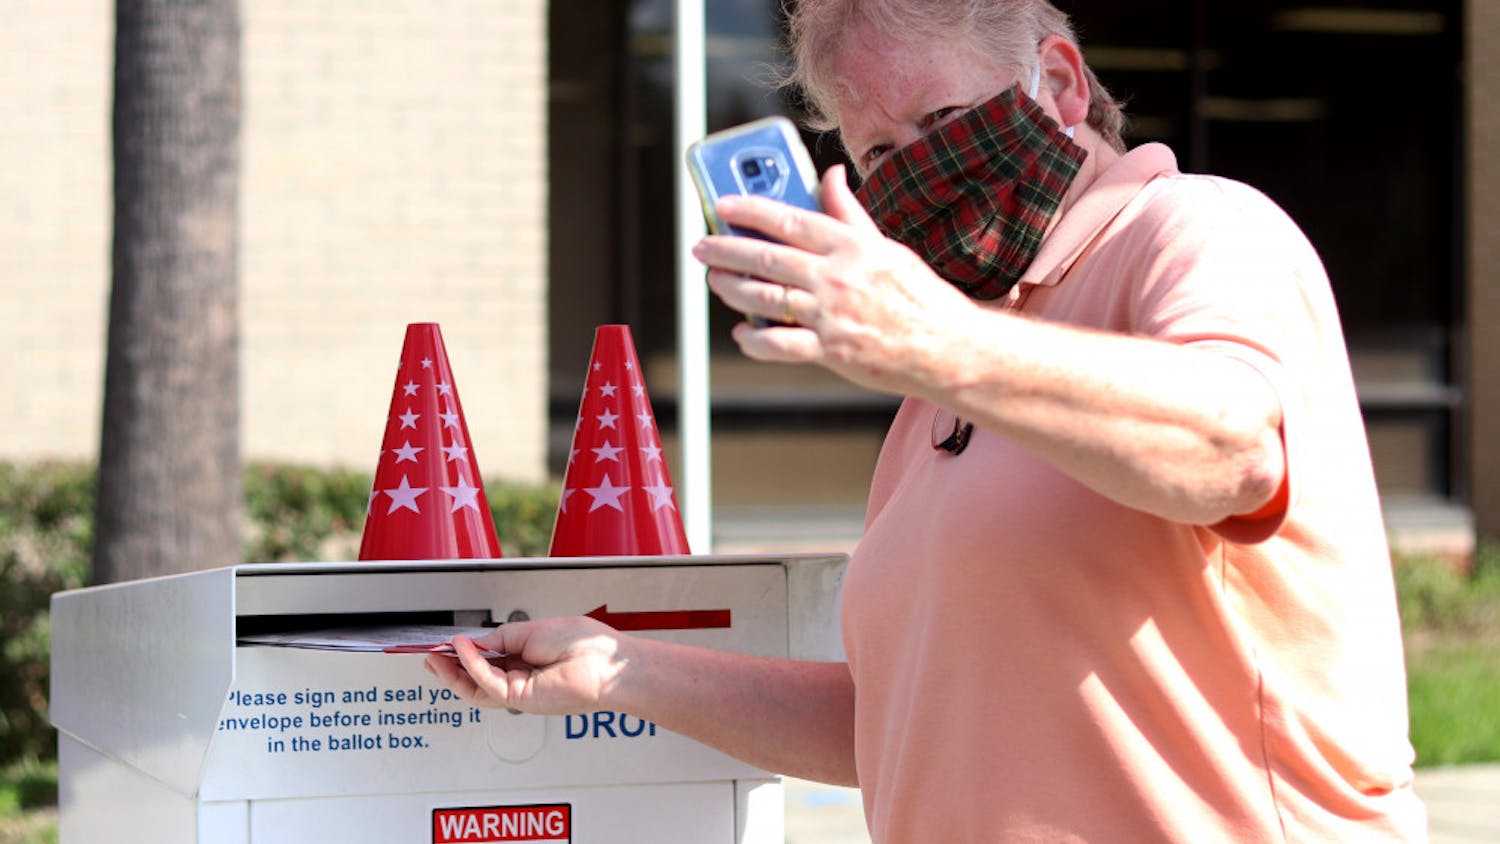 Linda Spurny takes a selfie with her ballot as she drops it off in front of the Alachua County Supervisor of Elections Office on Thursday, Oct. 15, 2020. She said she took the photo to insure it is counted. (Lauren Witte/Alligator Staff)